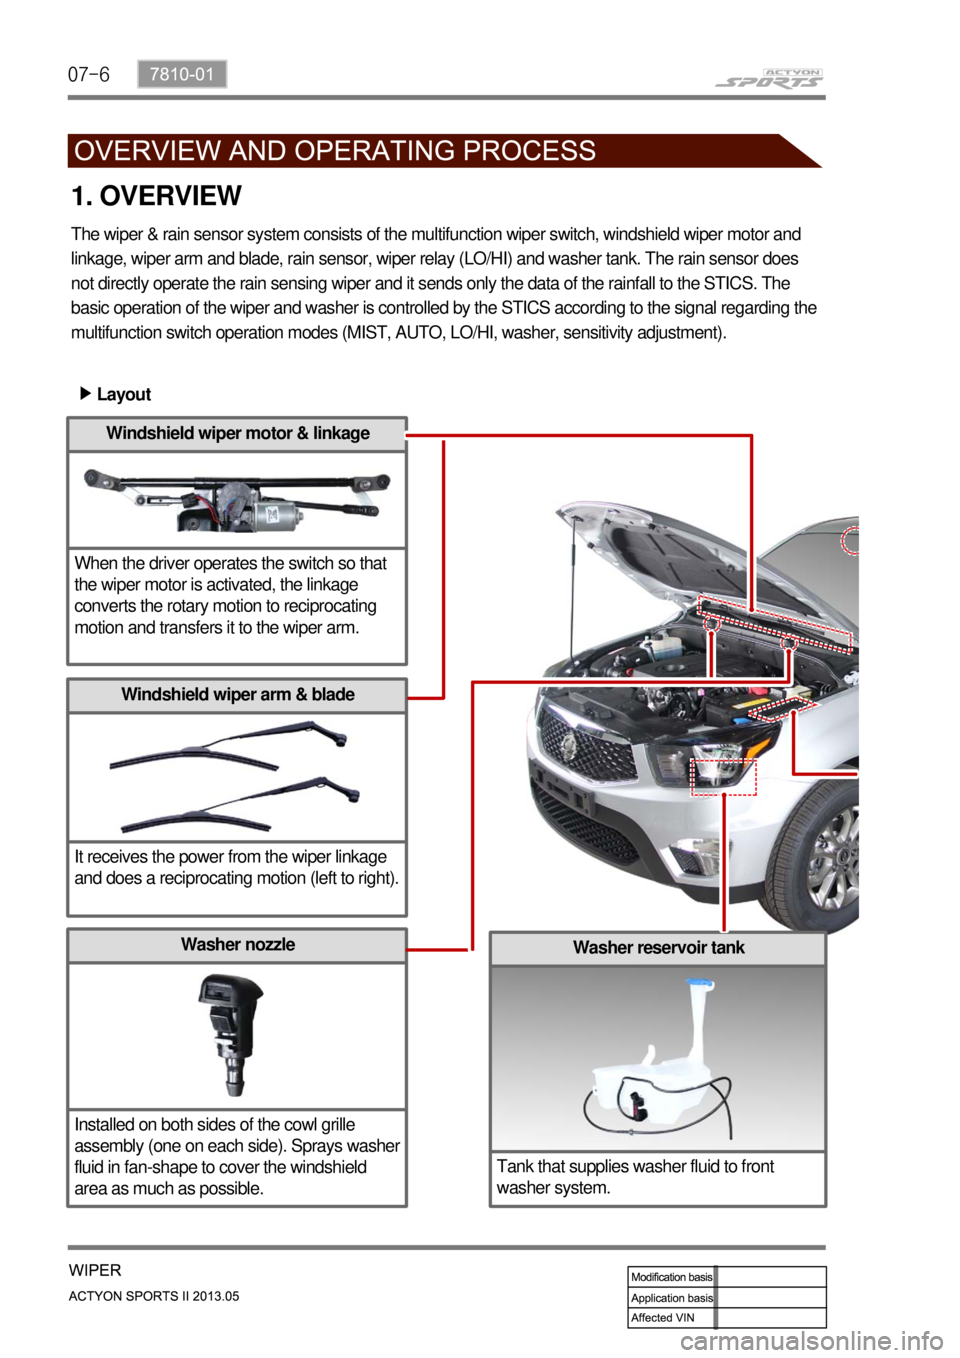 SSANGYONG NEW ACTYON SPORTS 2013  Service Manual 07-6
1. OVERVIEW
The wiper & rain sensor system consists of the multifunction wiper switch, windshield wiper motor and 
linkage, wiper arm and blade, rain sensor, wiper relay (LO/HI) and washer tank. 